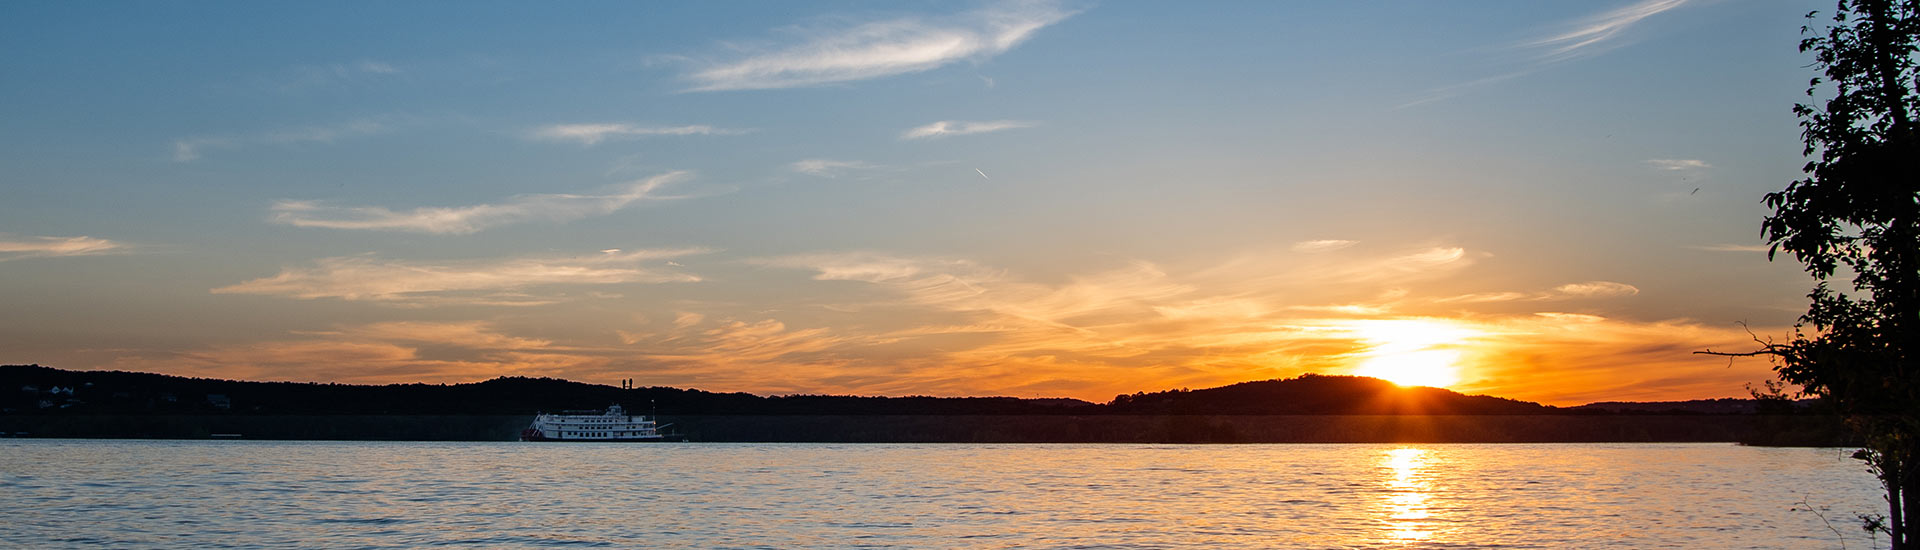 Panoramic view of a golden sunset at twilight over Table Rock Lake with the Showboat Branson Belle in the distance.